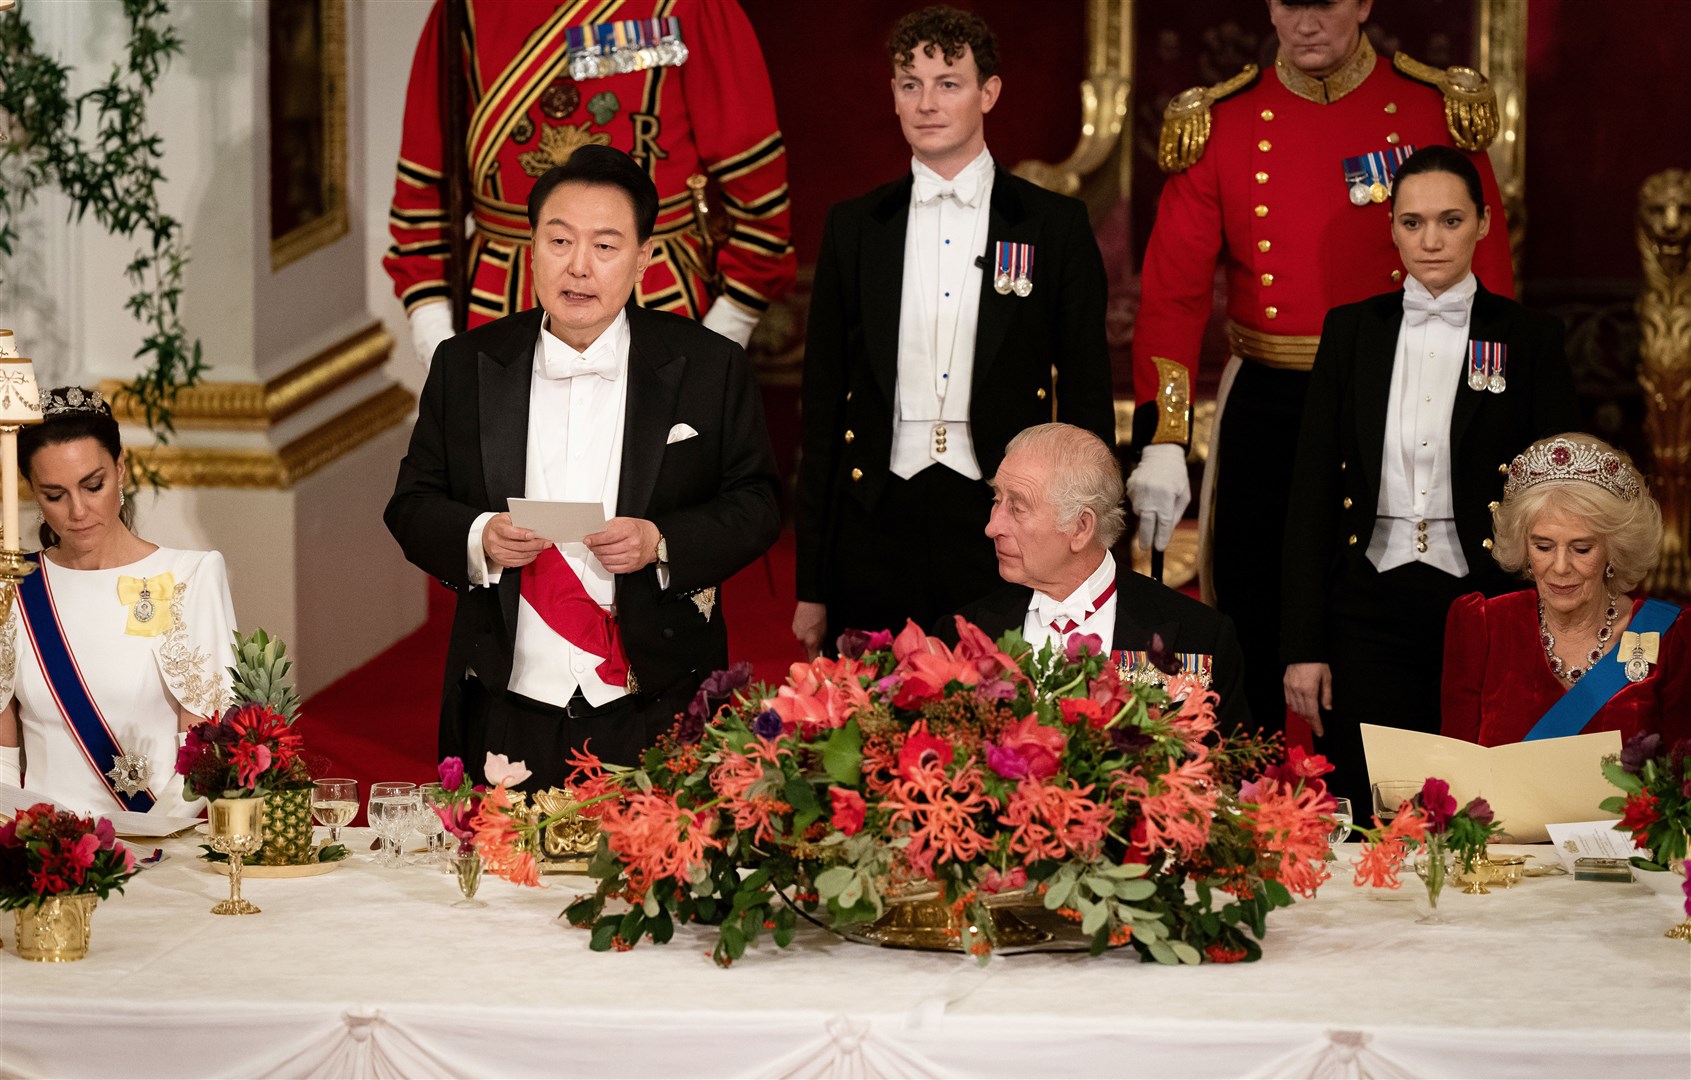 The King, the president and other guests at the top of the table used the coronation glasses updated with the King’s cypher (Aaron Chown/PA)